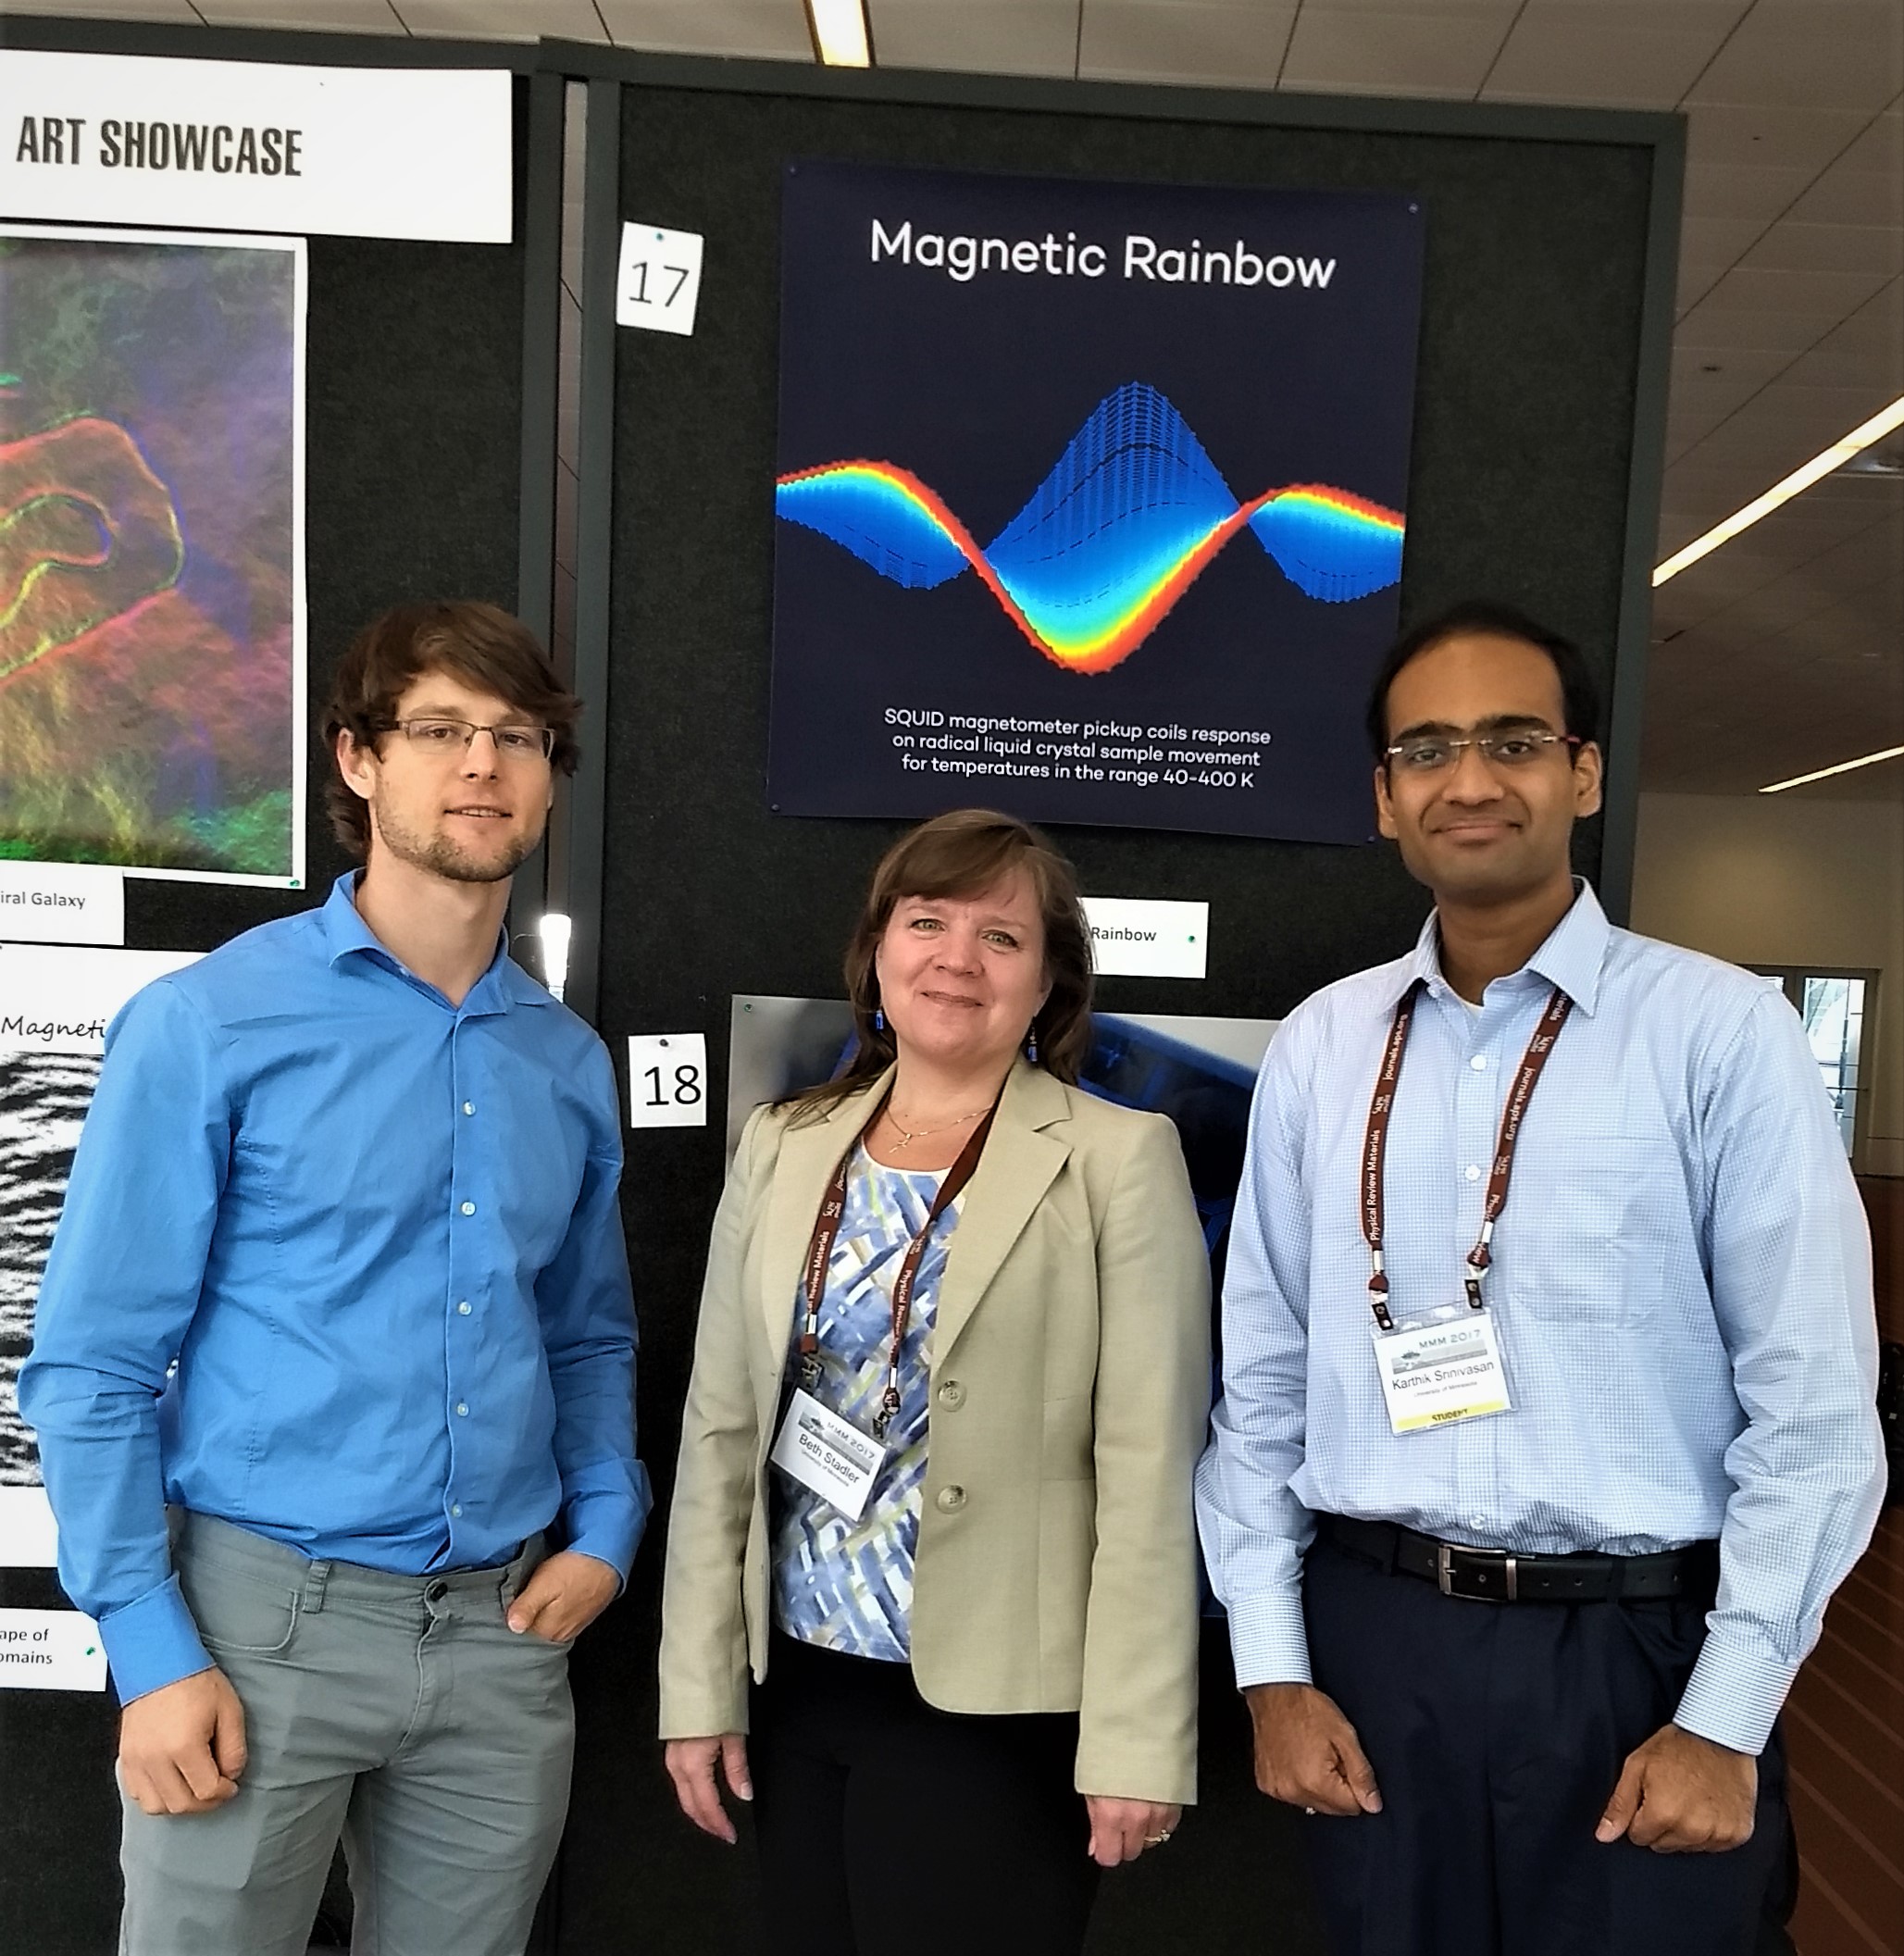 Stadler Research Group at MMM 2017, Pittsburgh, PA.